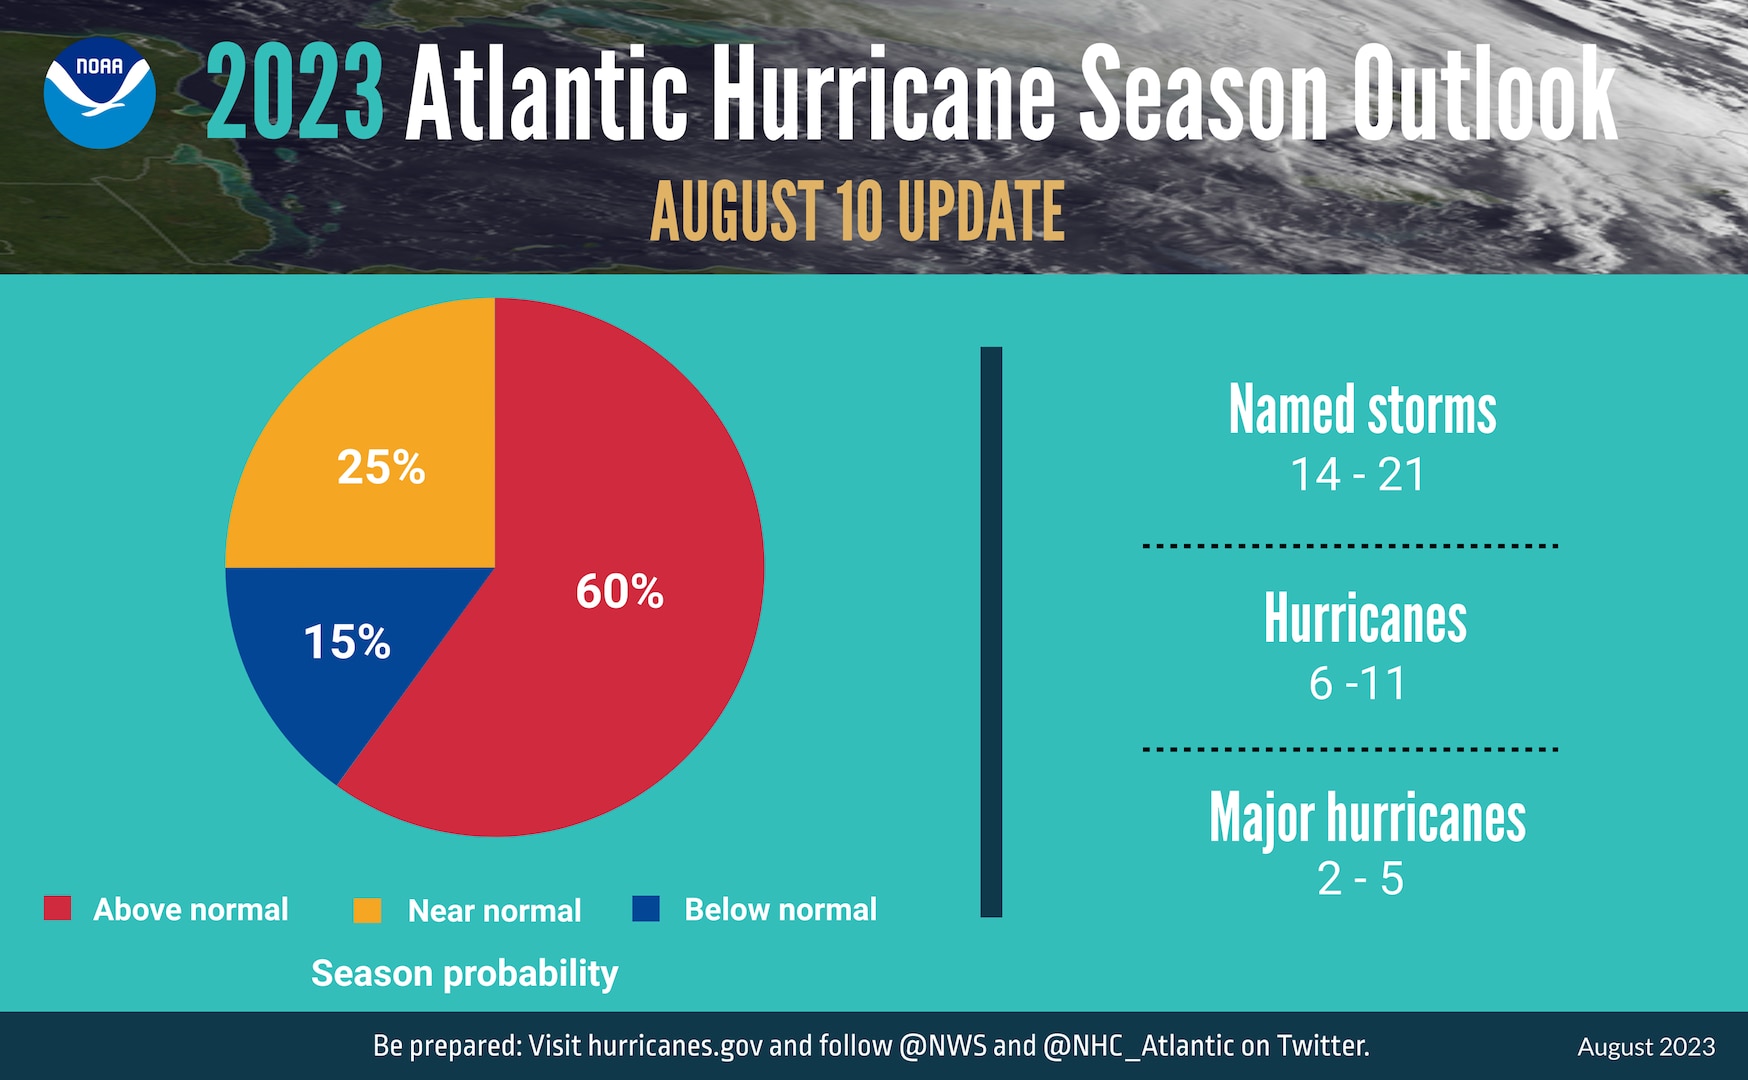 A graphic containing updated figures for the Atlantic Hurricane Season Outlook 2023 statistics. (U.S. Coast Guard graphic)